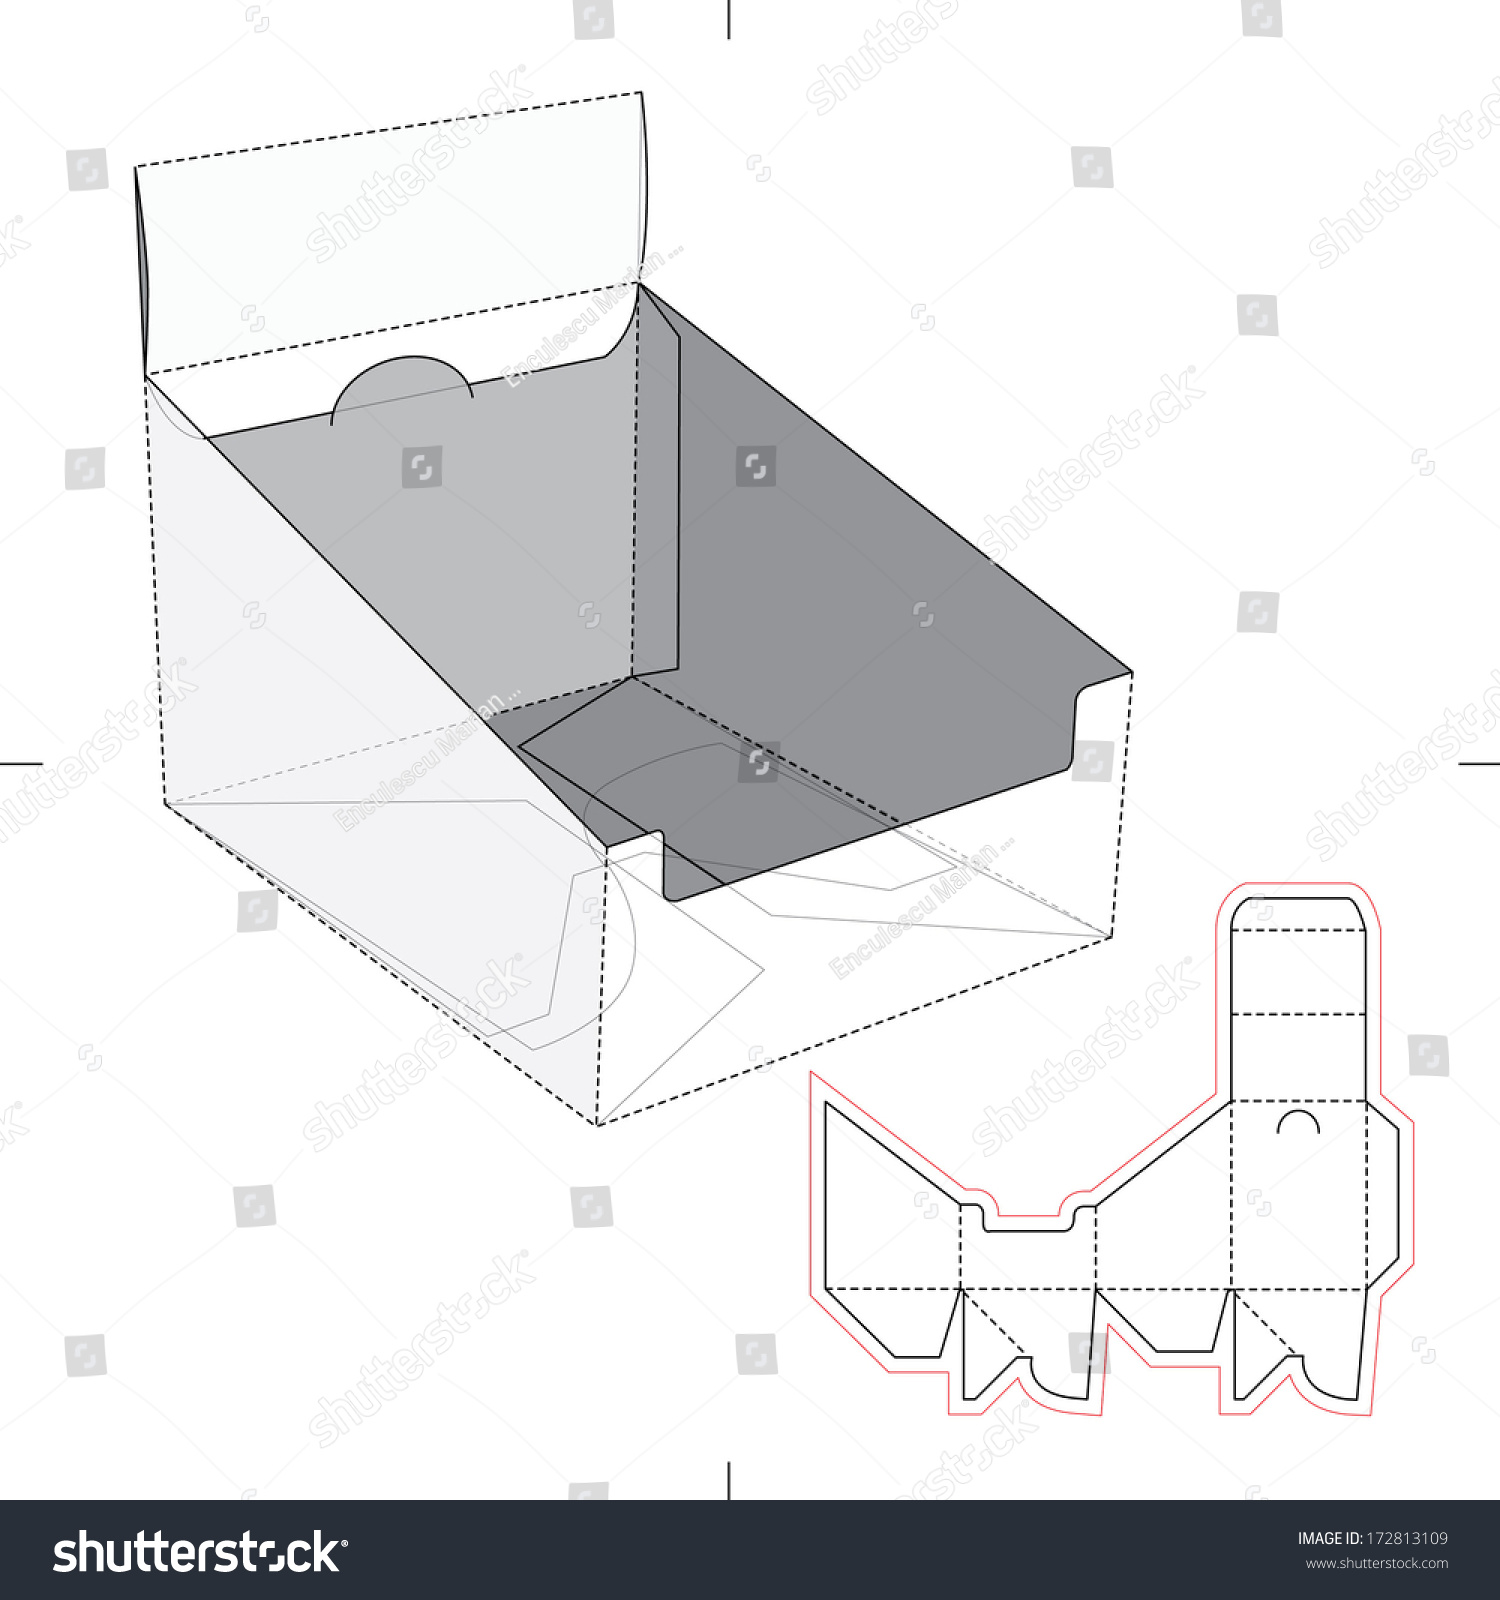 Product Display Box With Blueprint Layout Stock Vector Illustration ...